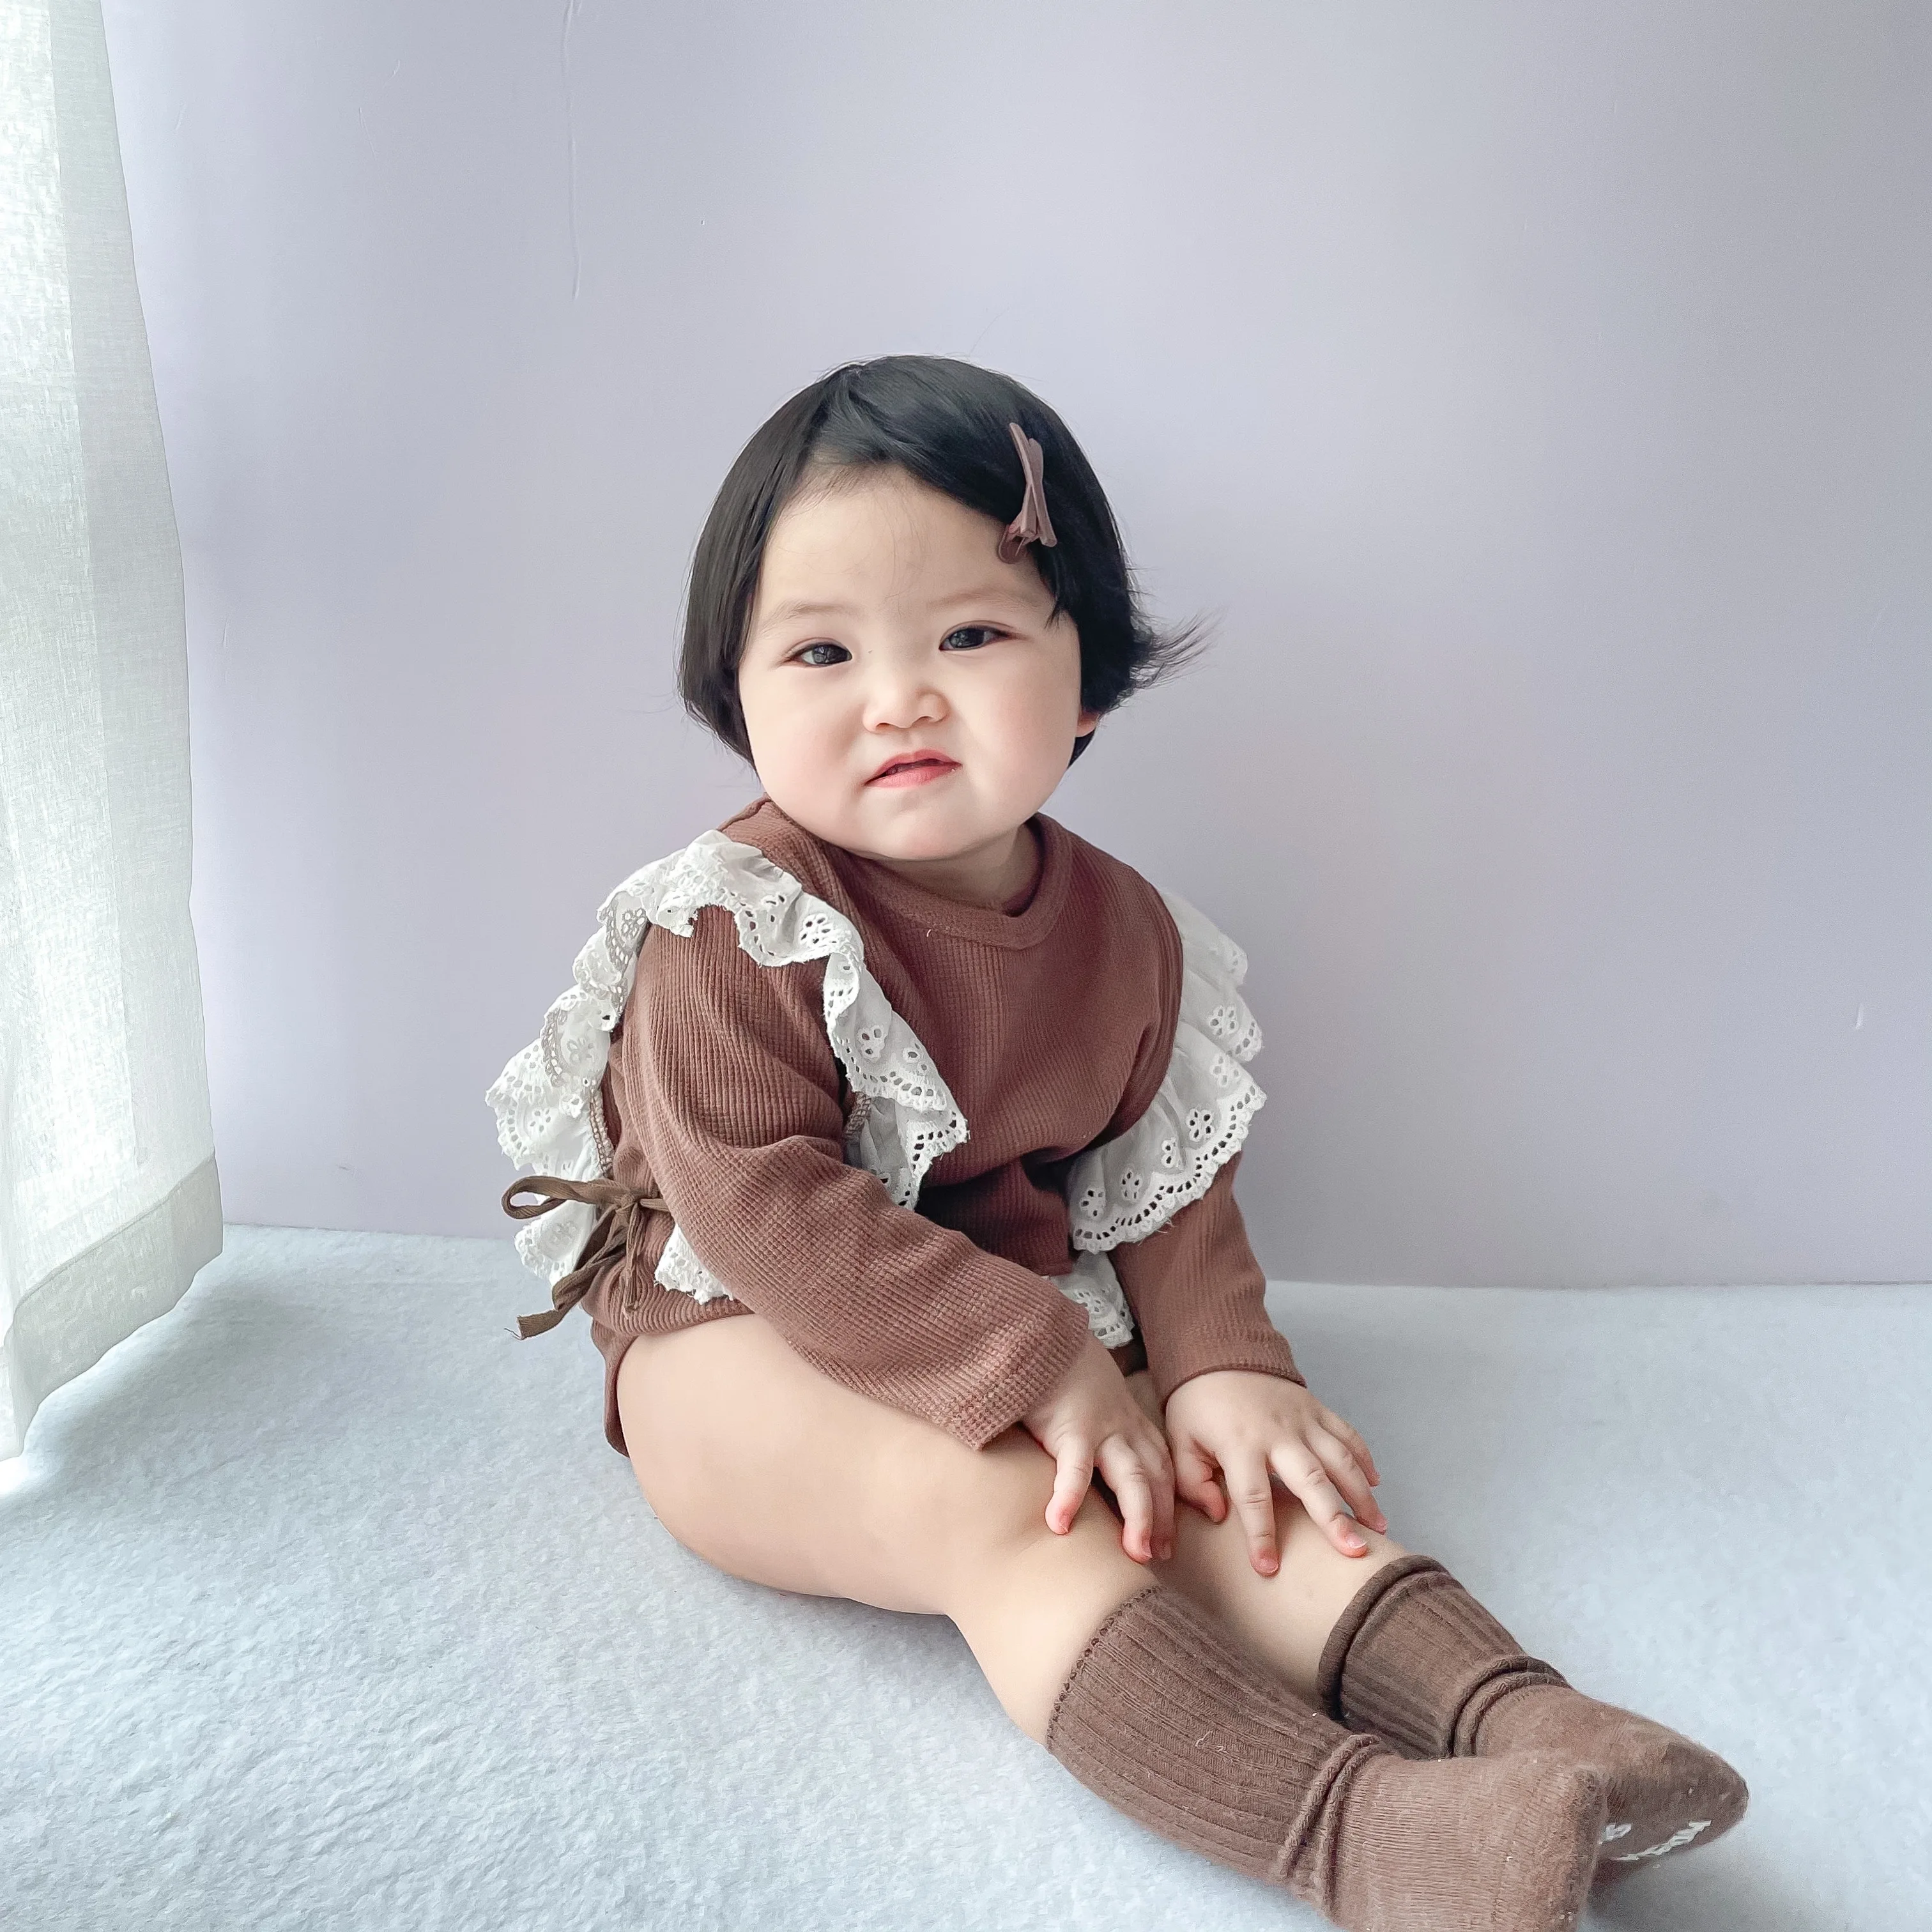 Baby Bodysuits cheap 2022 autumn baby girl's solid color romper + windproof vest two-piece set jumpsuit clothes triangle romper Baby Bodysuits comfotable